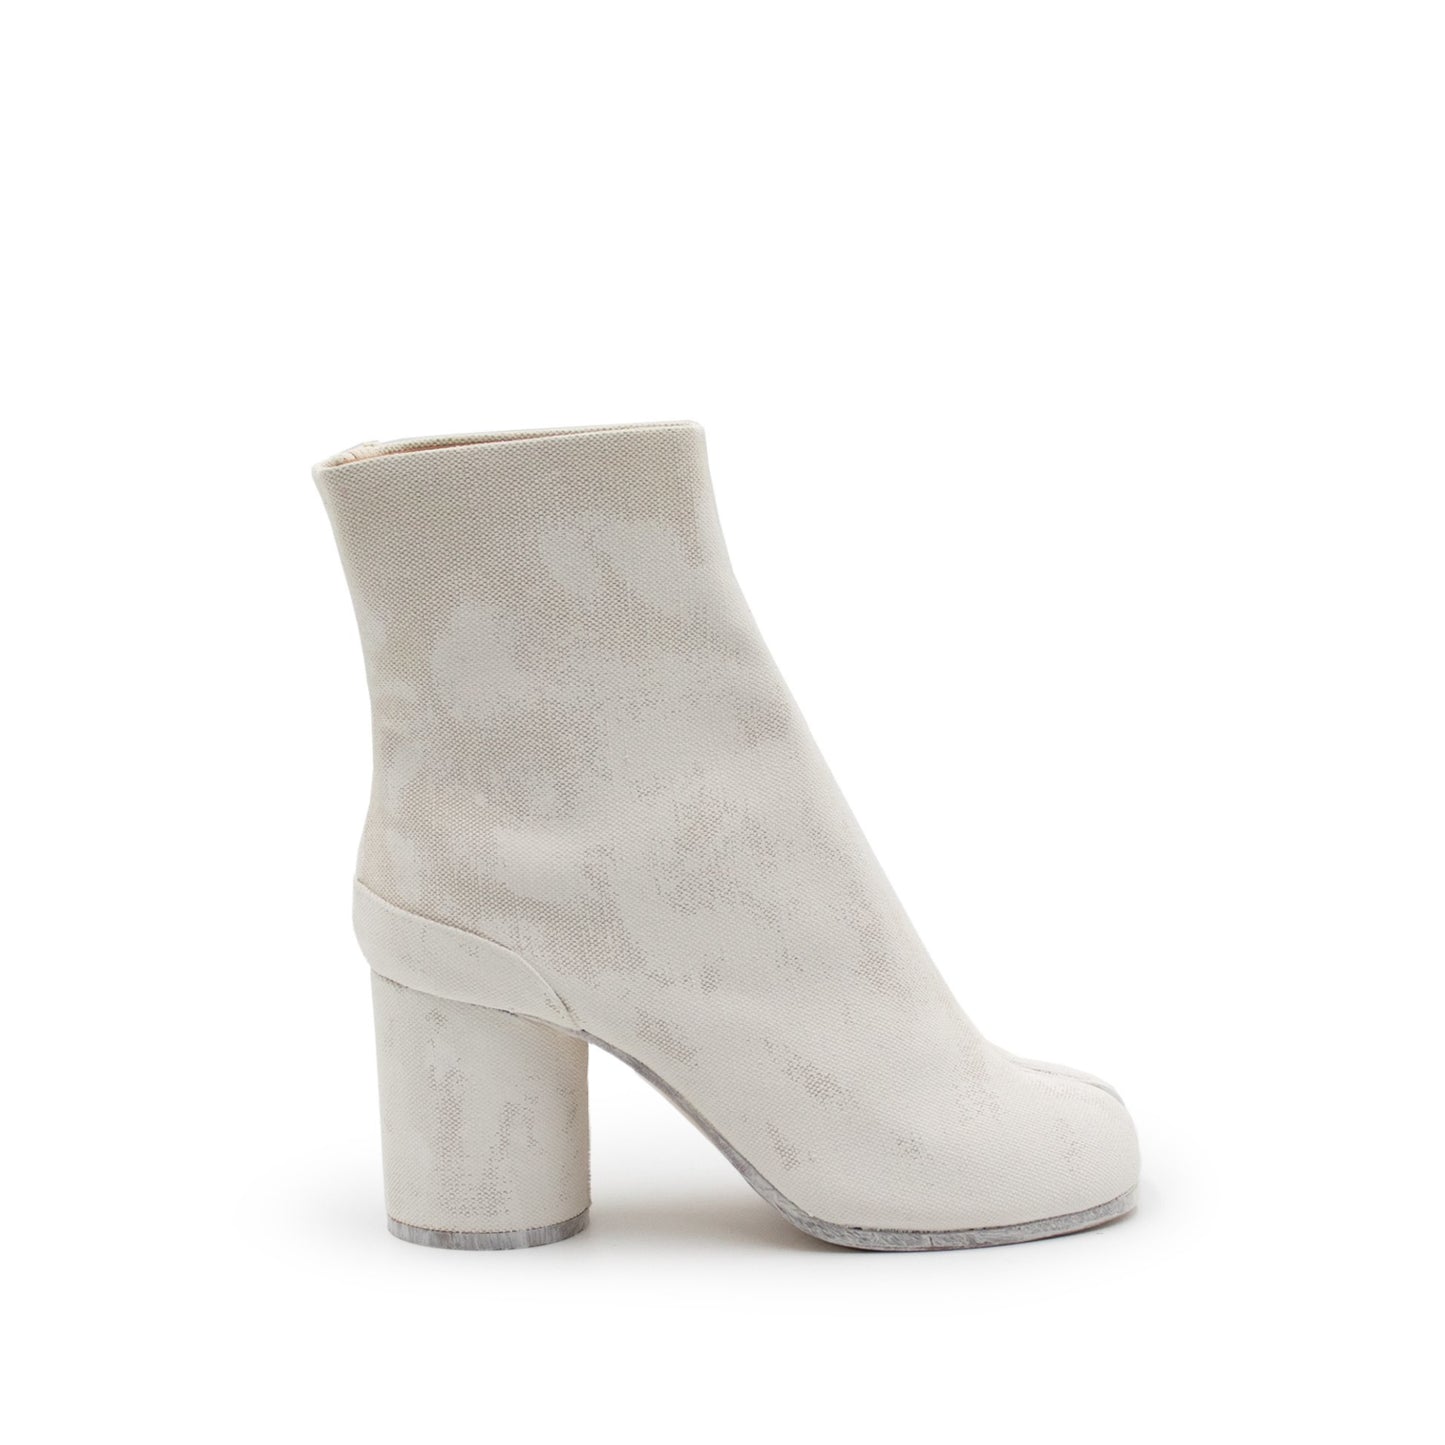 Tabi Toe Ankle Boots 80 Mm in Sand